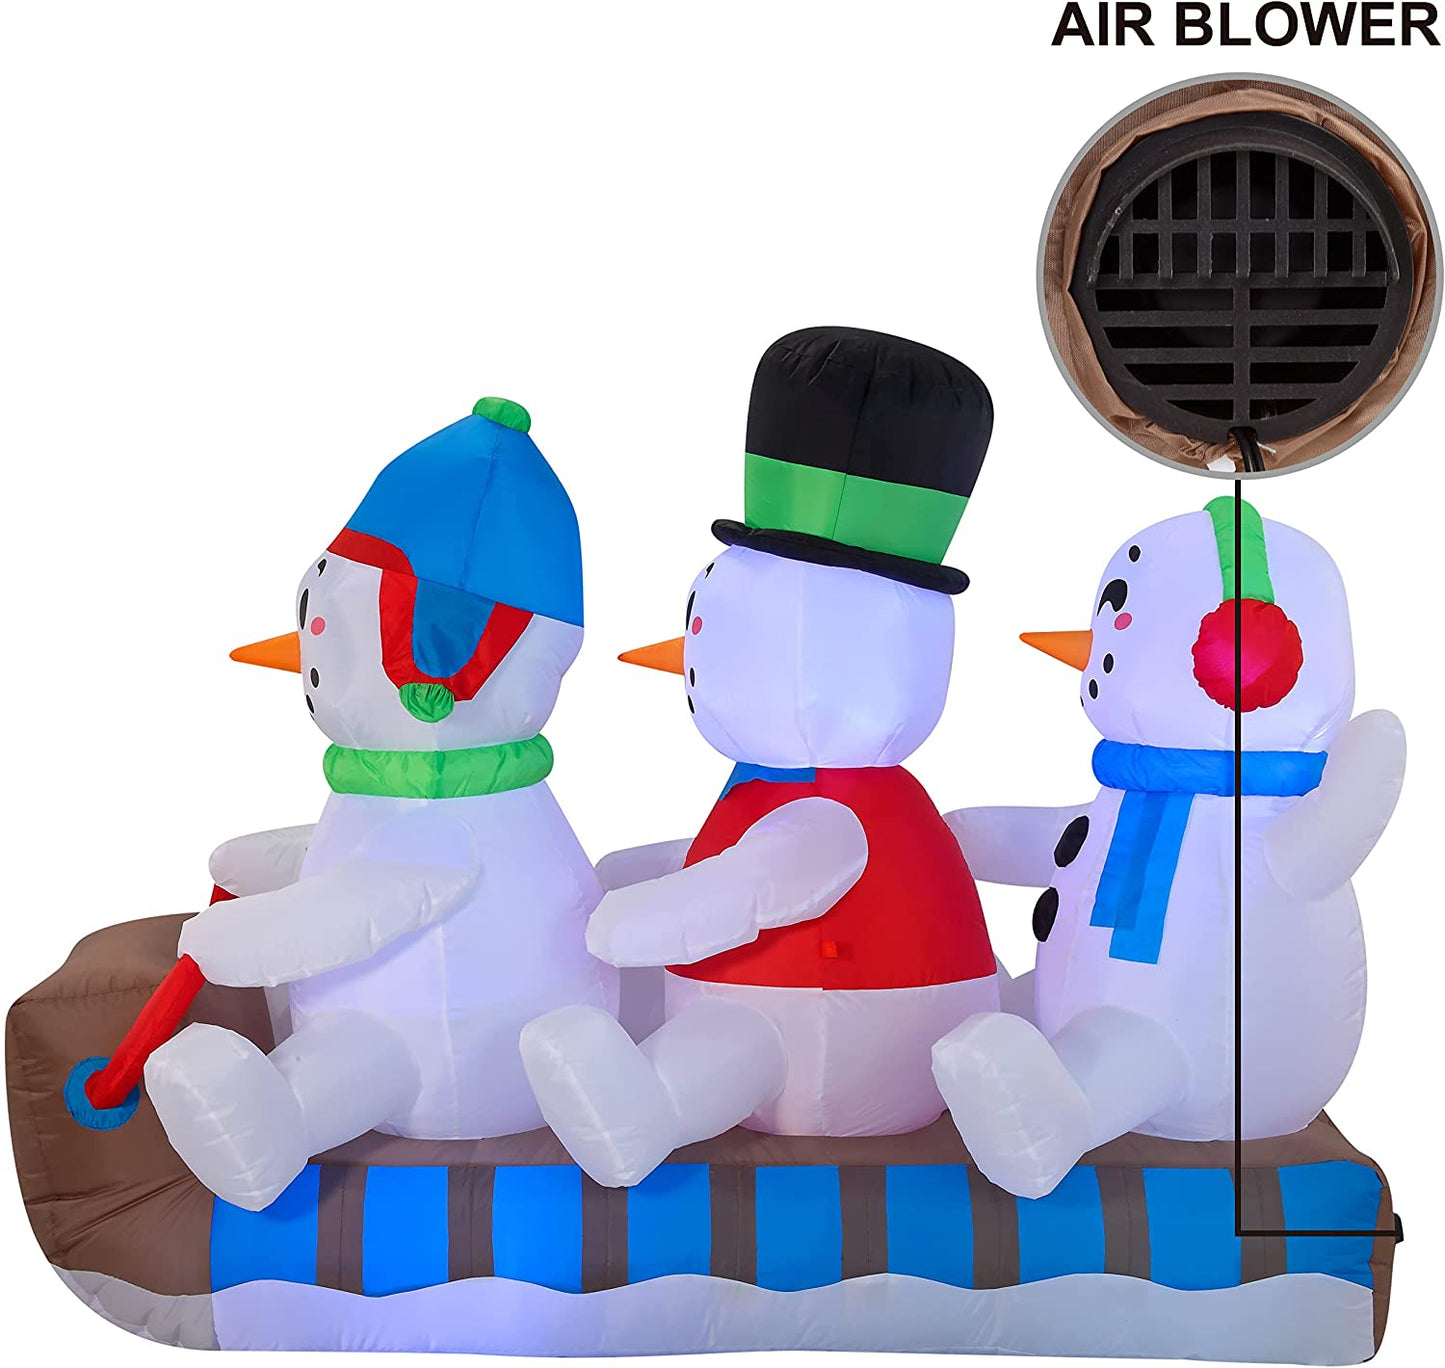 6 FT Long Christmas Inflatable Snowmen On The Sleighs